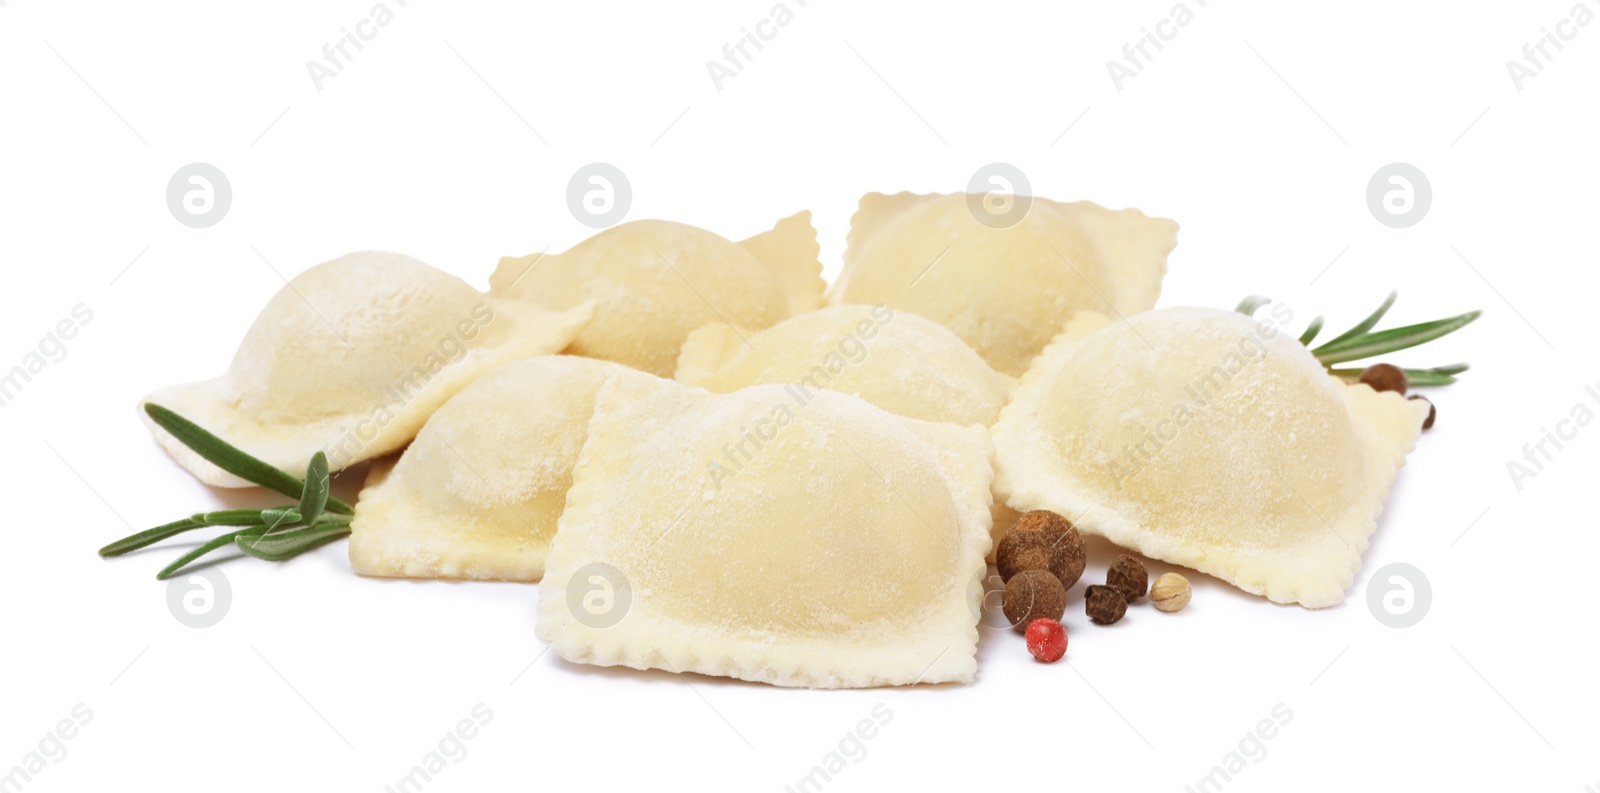 Photo of Uncooked ravioli, rosemary and peppercorns on white background